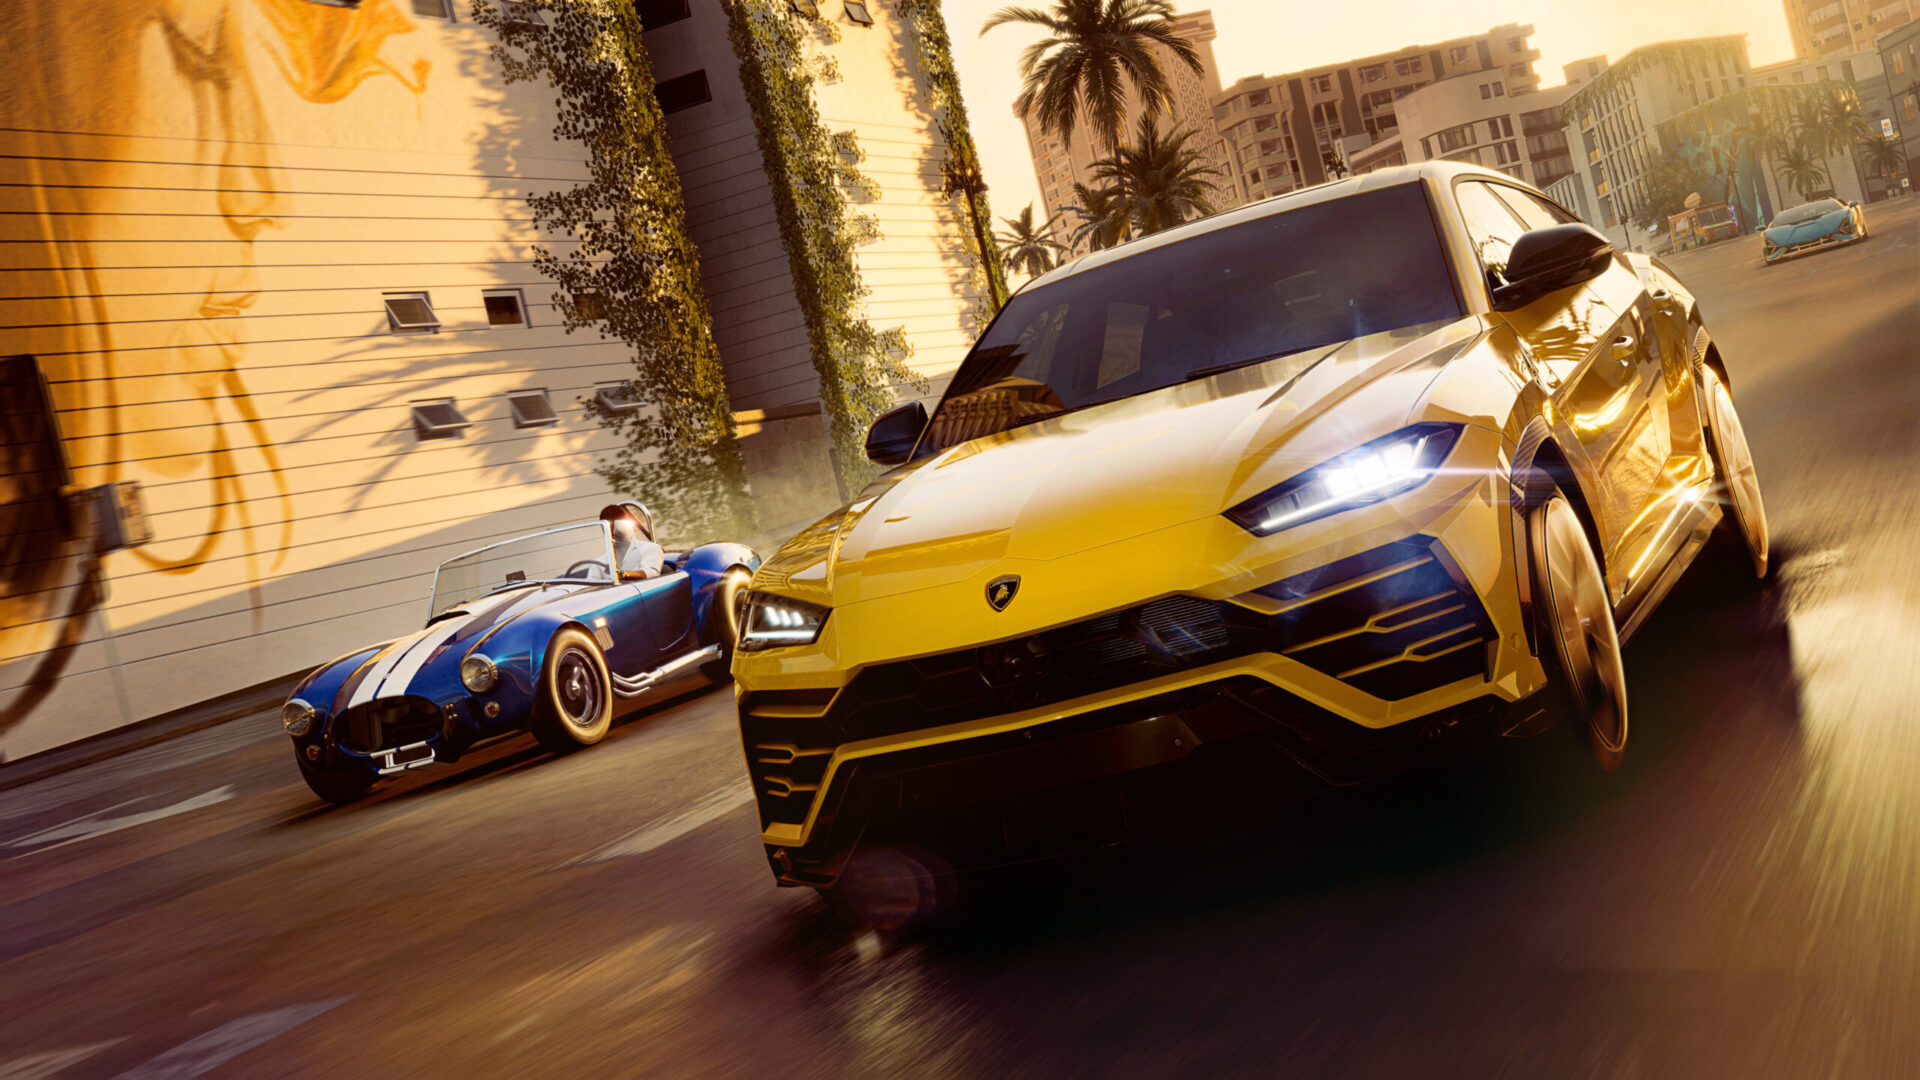 Videos of The Crew Motorfest gameplay have been leaked online